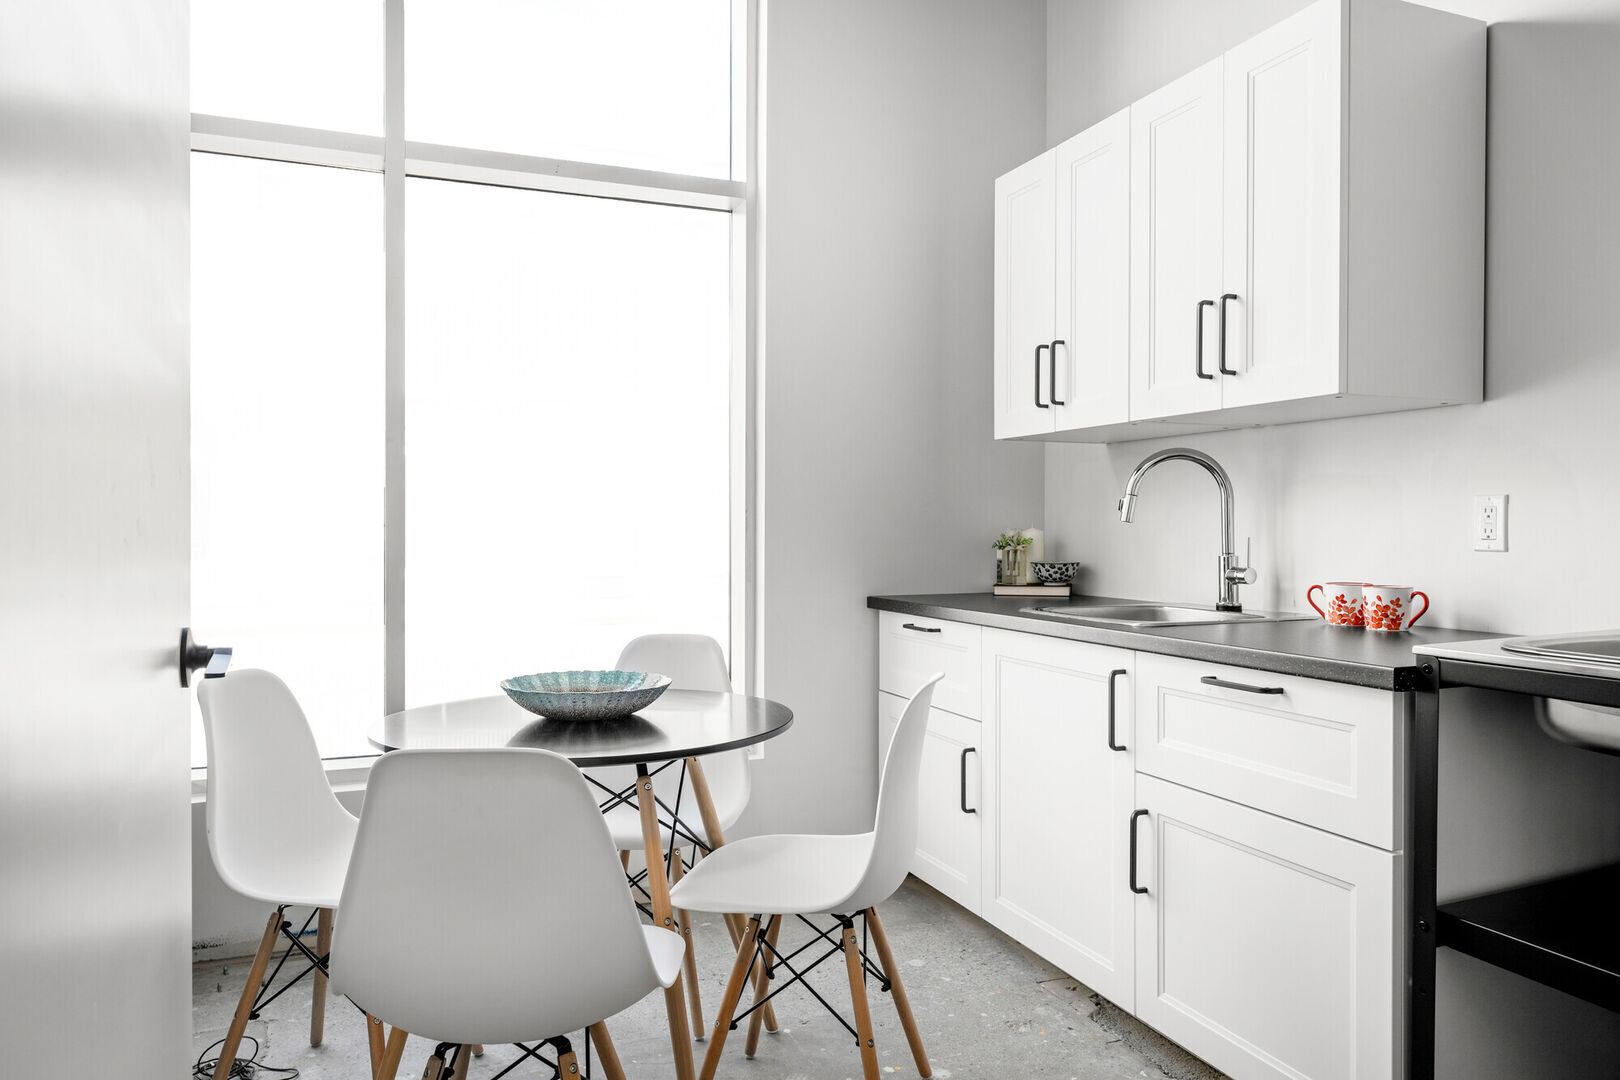 Calgary interior design commercial space kitchen modern clean light white bright